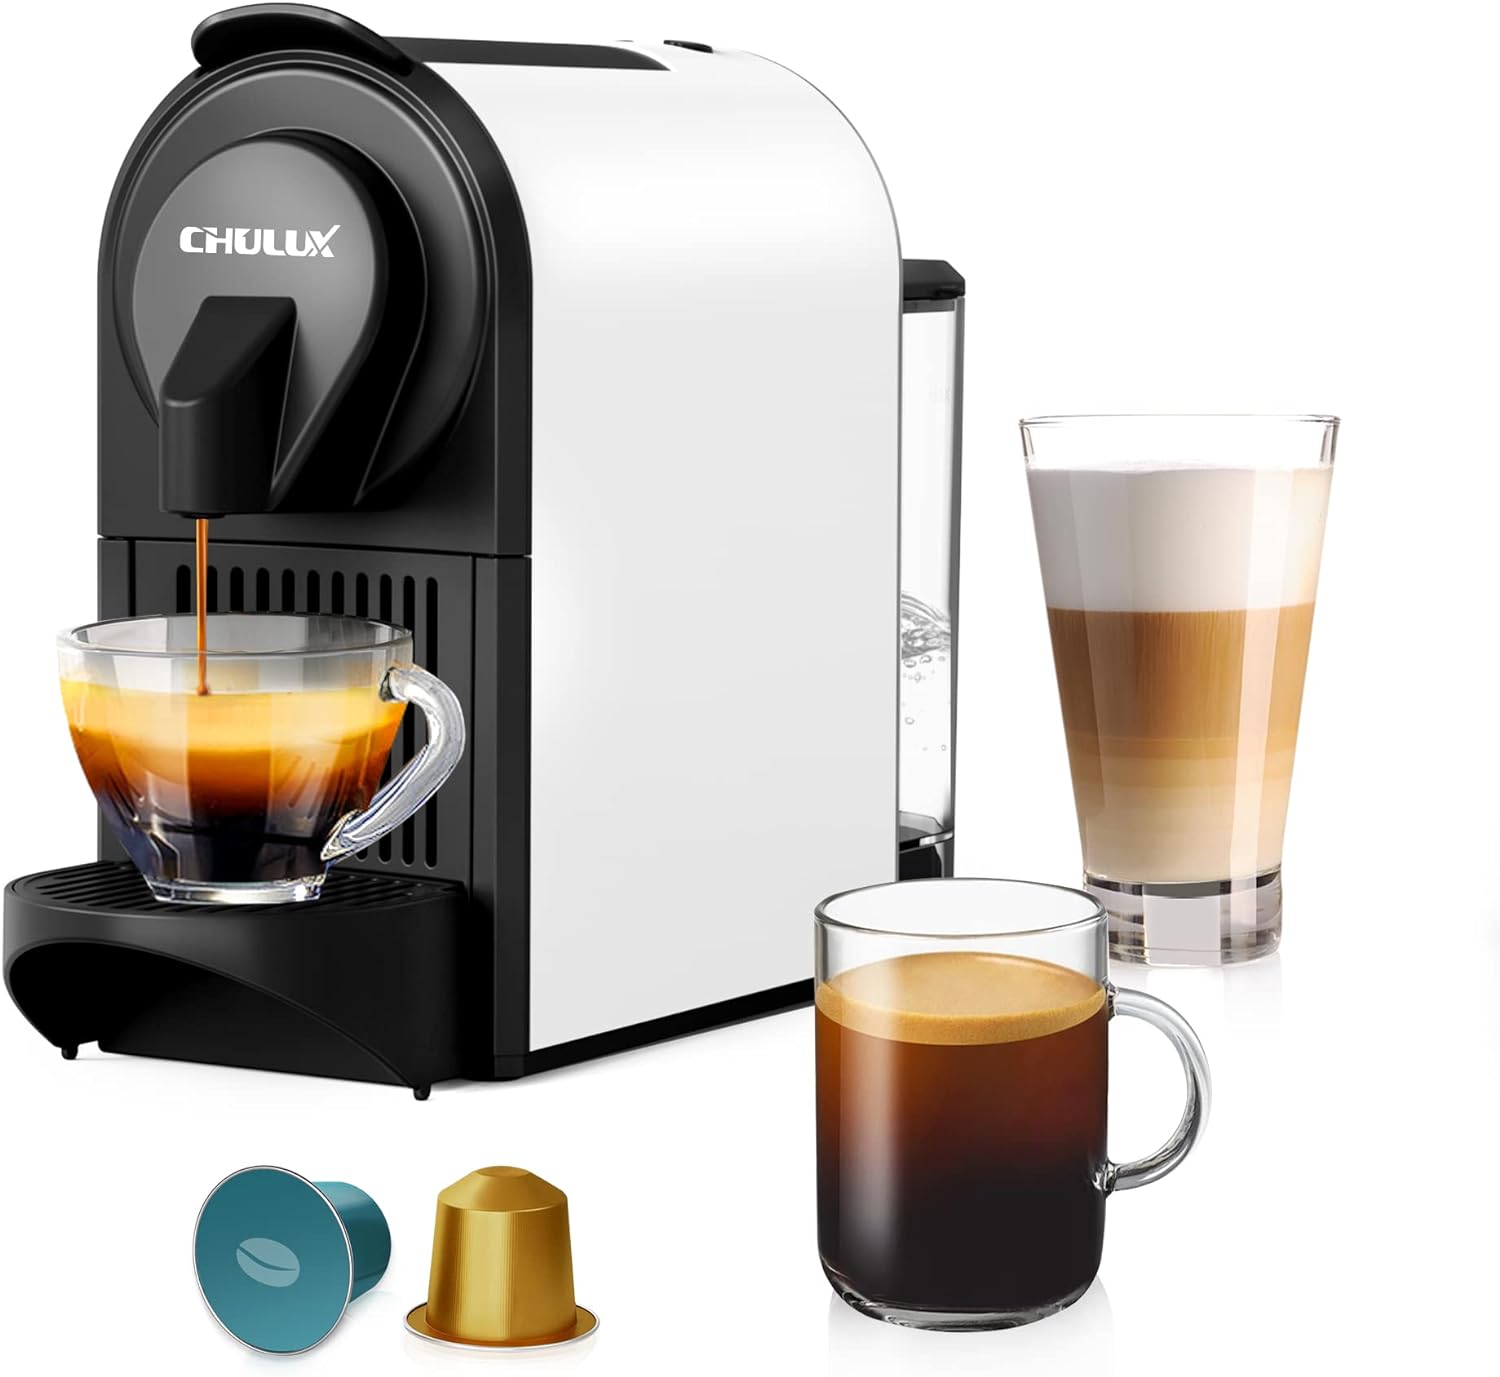 i love this little coffee maker. if you can understand that it does not froth mike and you can do that yourself with a hand held machine you will like this machine. it is cheaper and it does not take up much counter space like the bigger machines do.